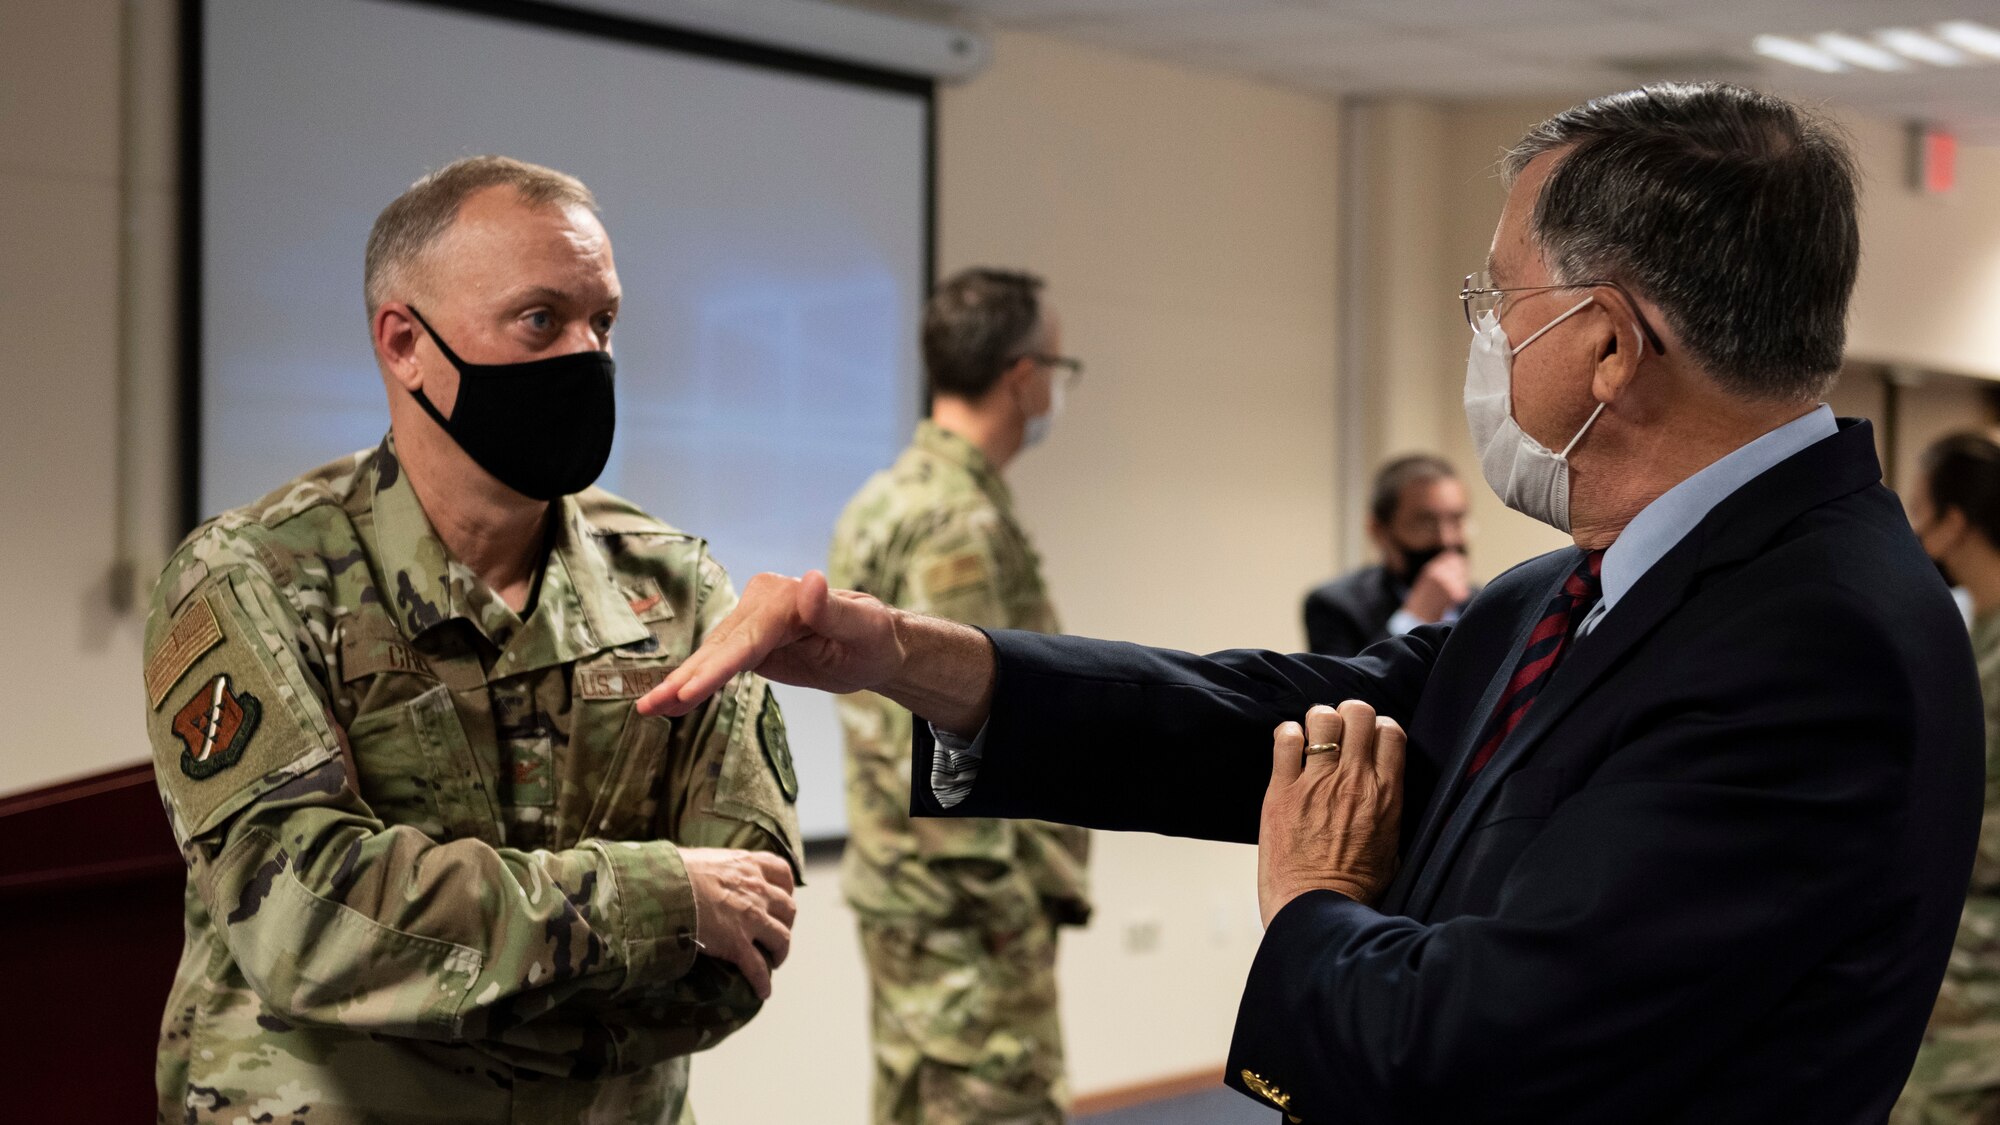 Col. John Creel, 39th Air Base Wing commander, and U.S. Ambassador to Turkey David Satterfield talk about strategy with hand gestures and from behind face masks.